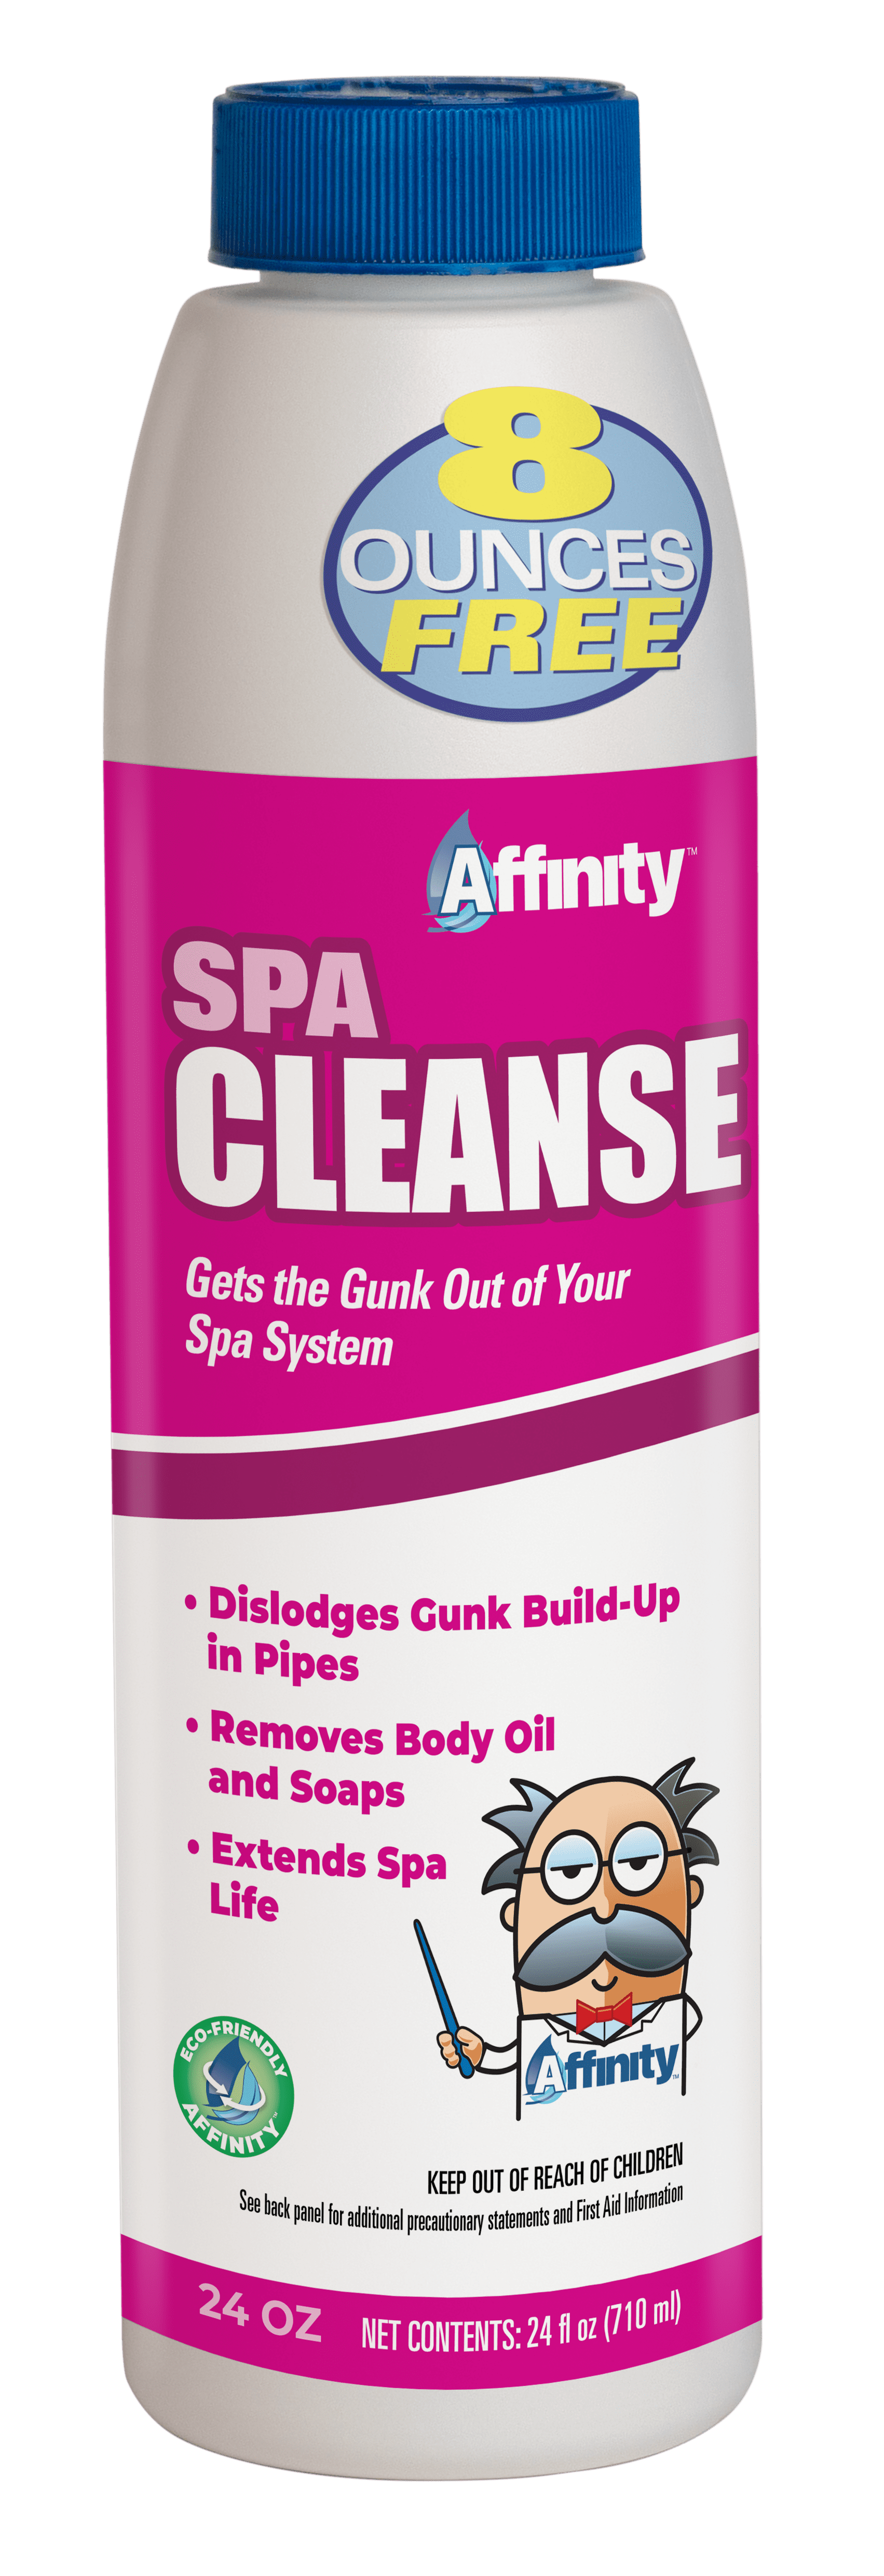 Affinity Spa Cleanse